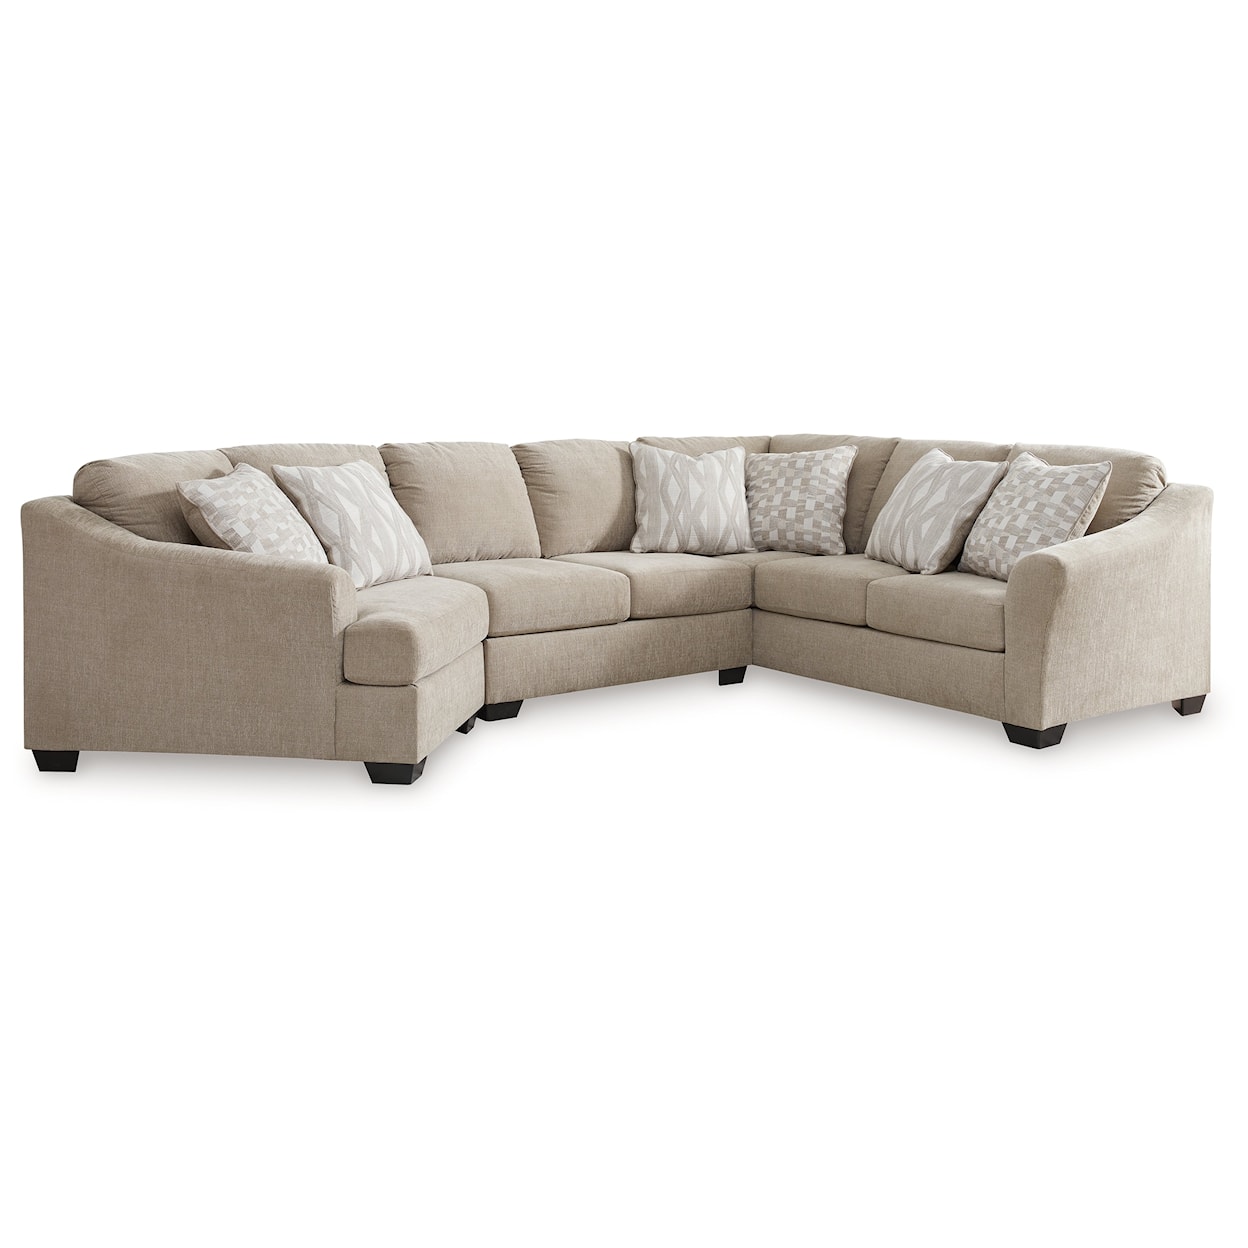 Signature Design by Ashley Furniture Brogan Bay 3-Piece Sectional With Cuddler